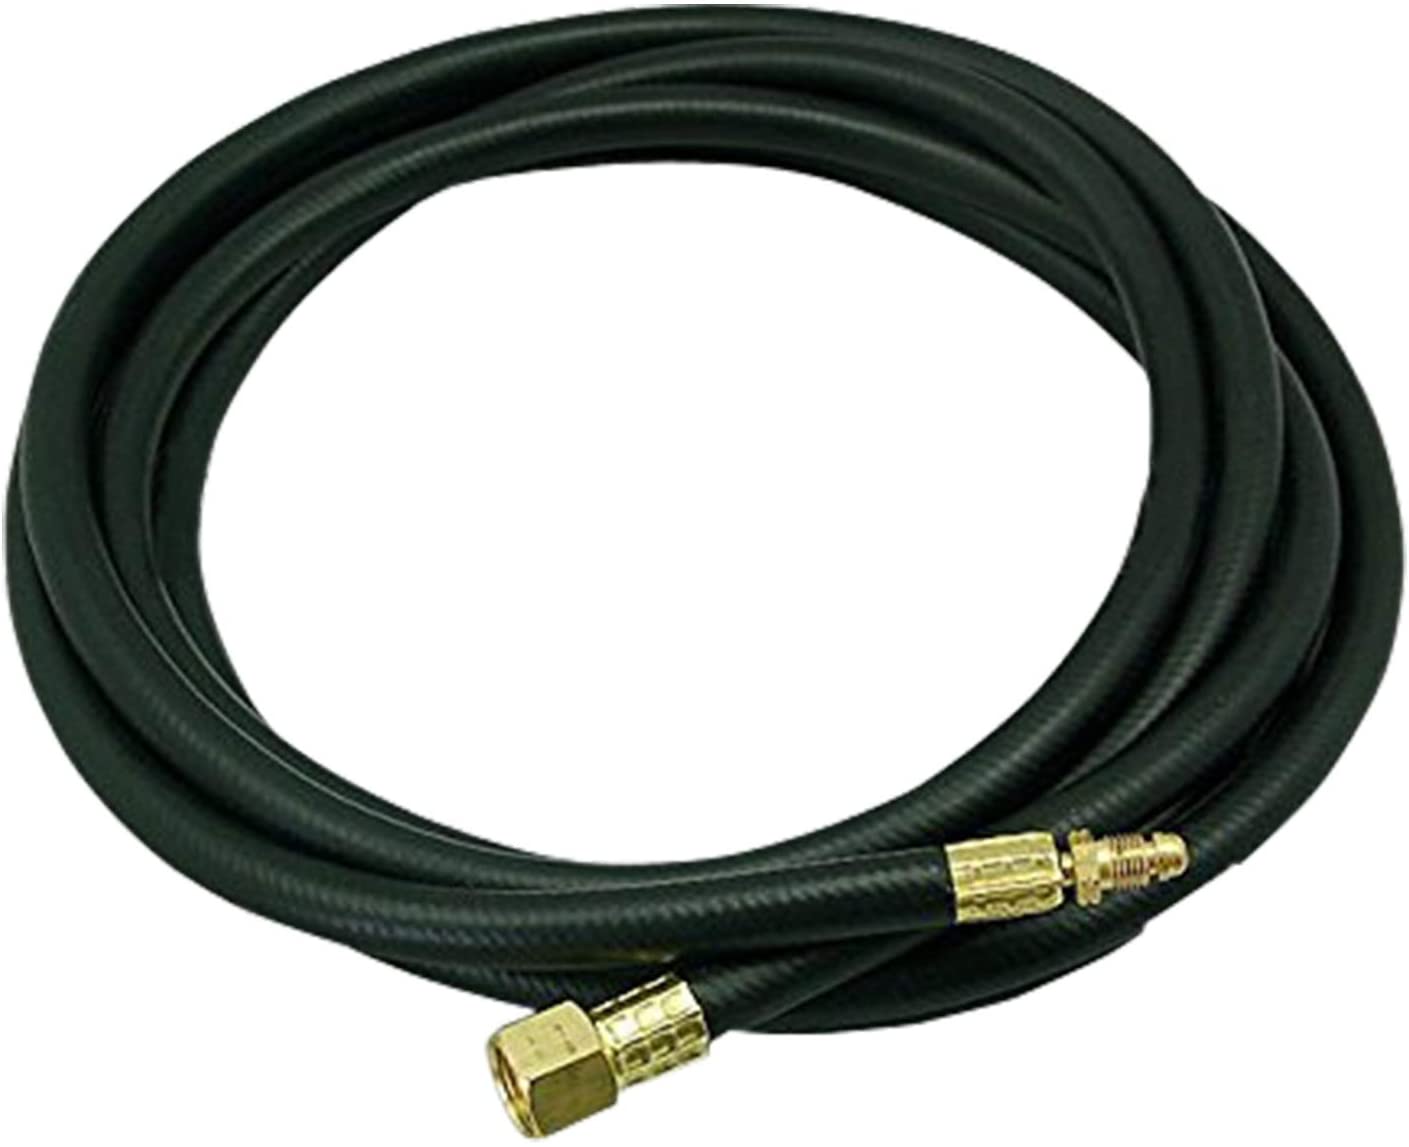 Power Cable Hose for WP-18 TIG Welding Torch 25" Feet Wire 10mm2 Connector M161.5 & 5/8-18 outside thread (WP-18 25")